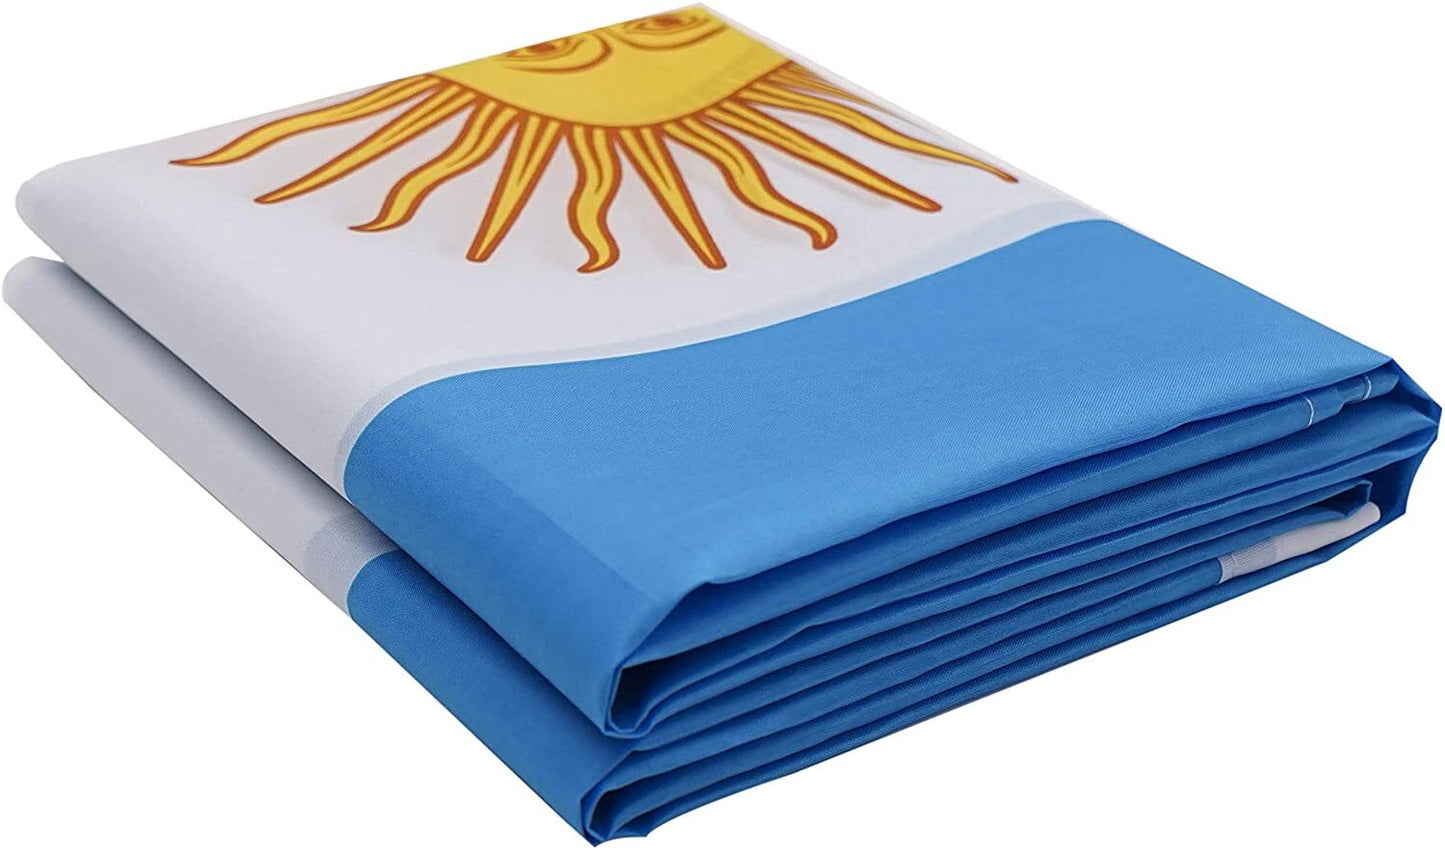 Large Argentina Argentinian Flag Heavy Duty Outdoor 90 X 150 CM - 3ft x 5ft - Homeware Discounts